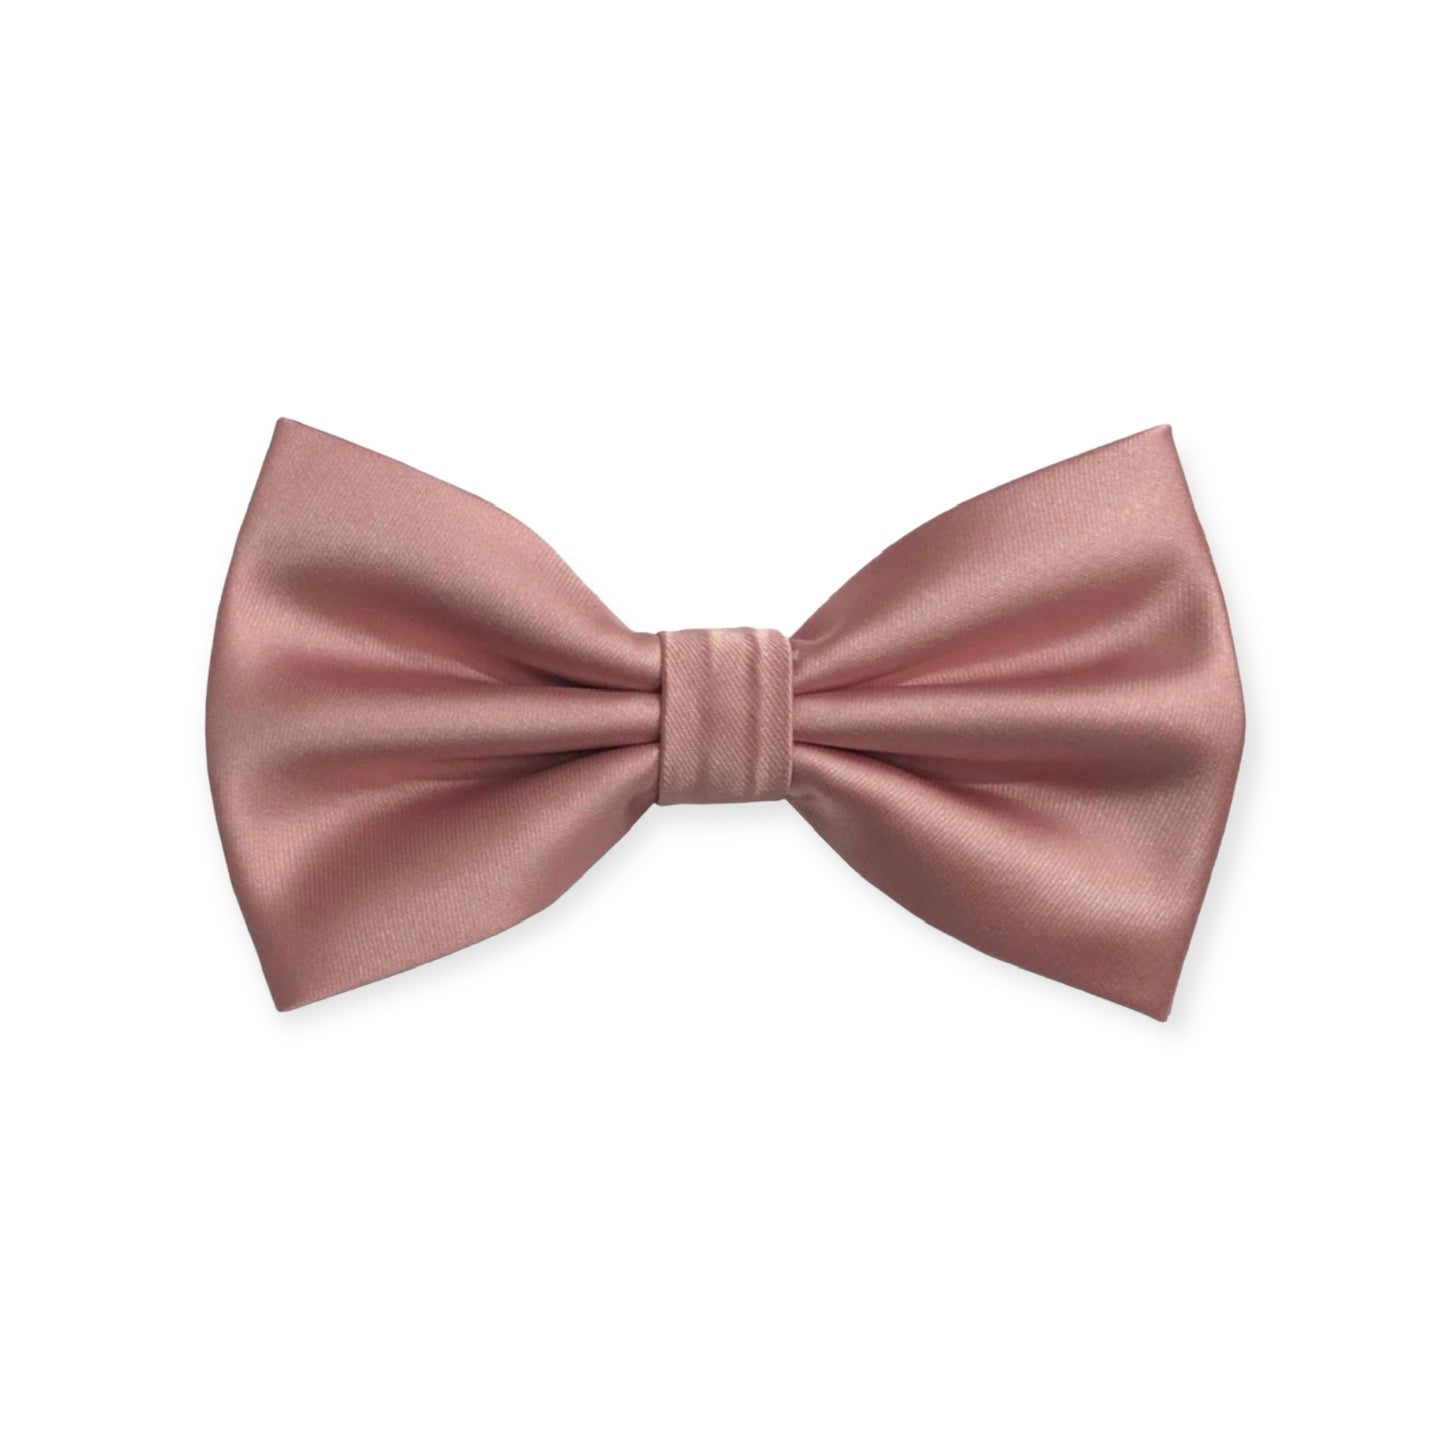 Solid Dusty Rose Bow Tie